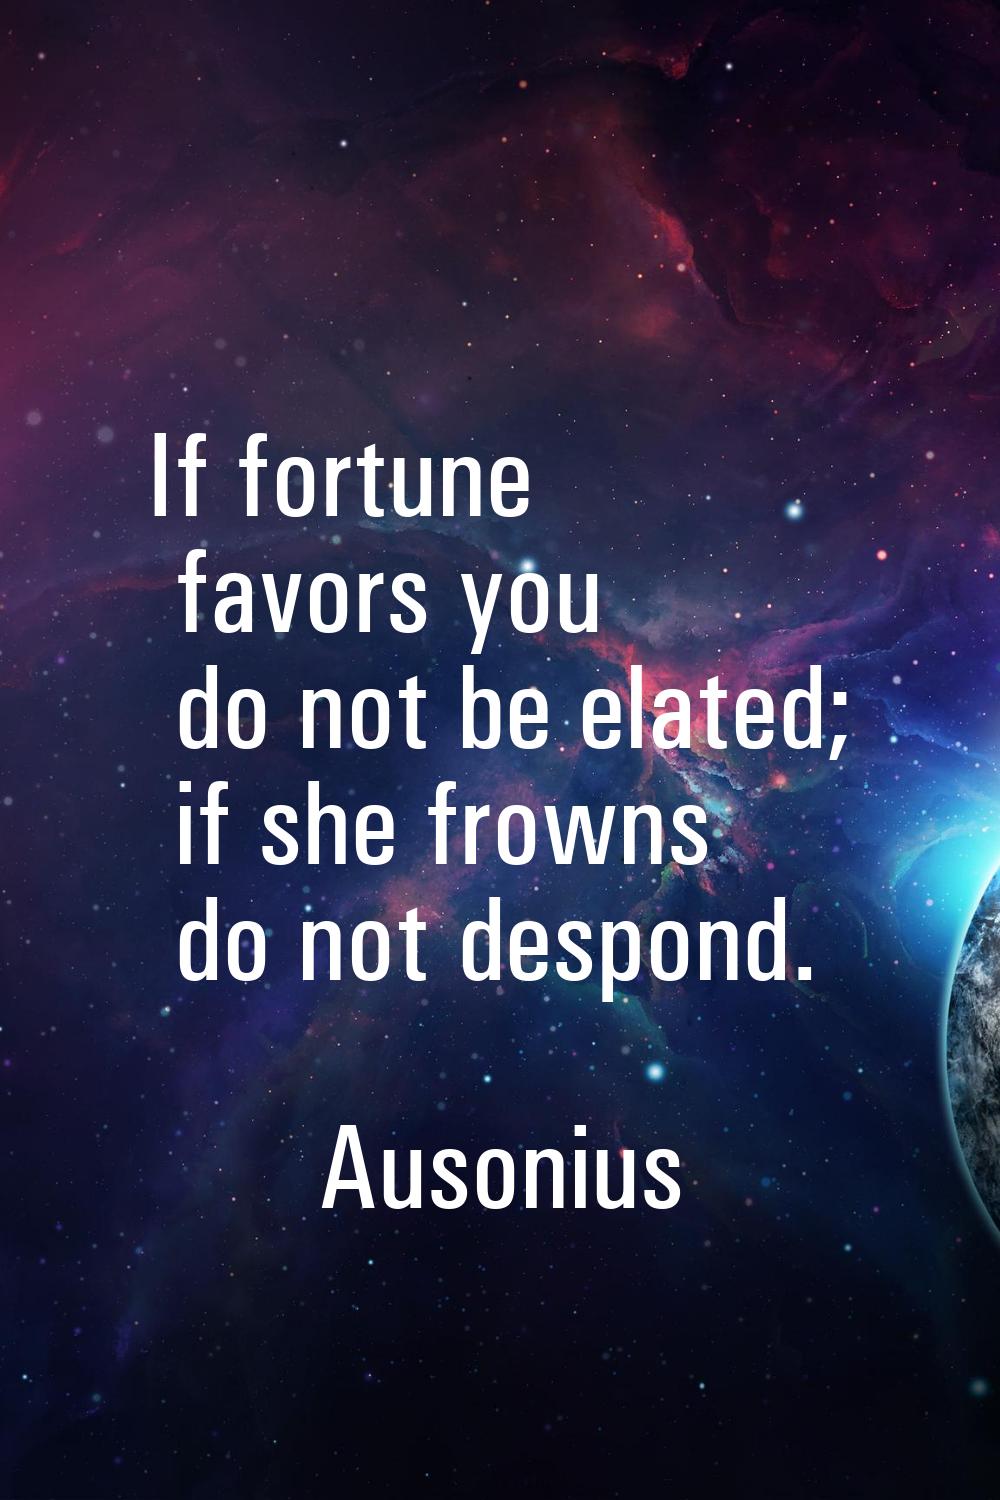 If fortune favors you do not be elated; if she frowns do not despond.